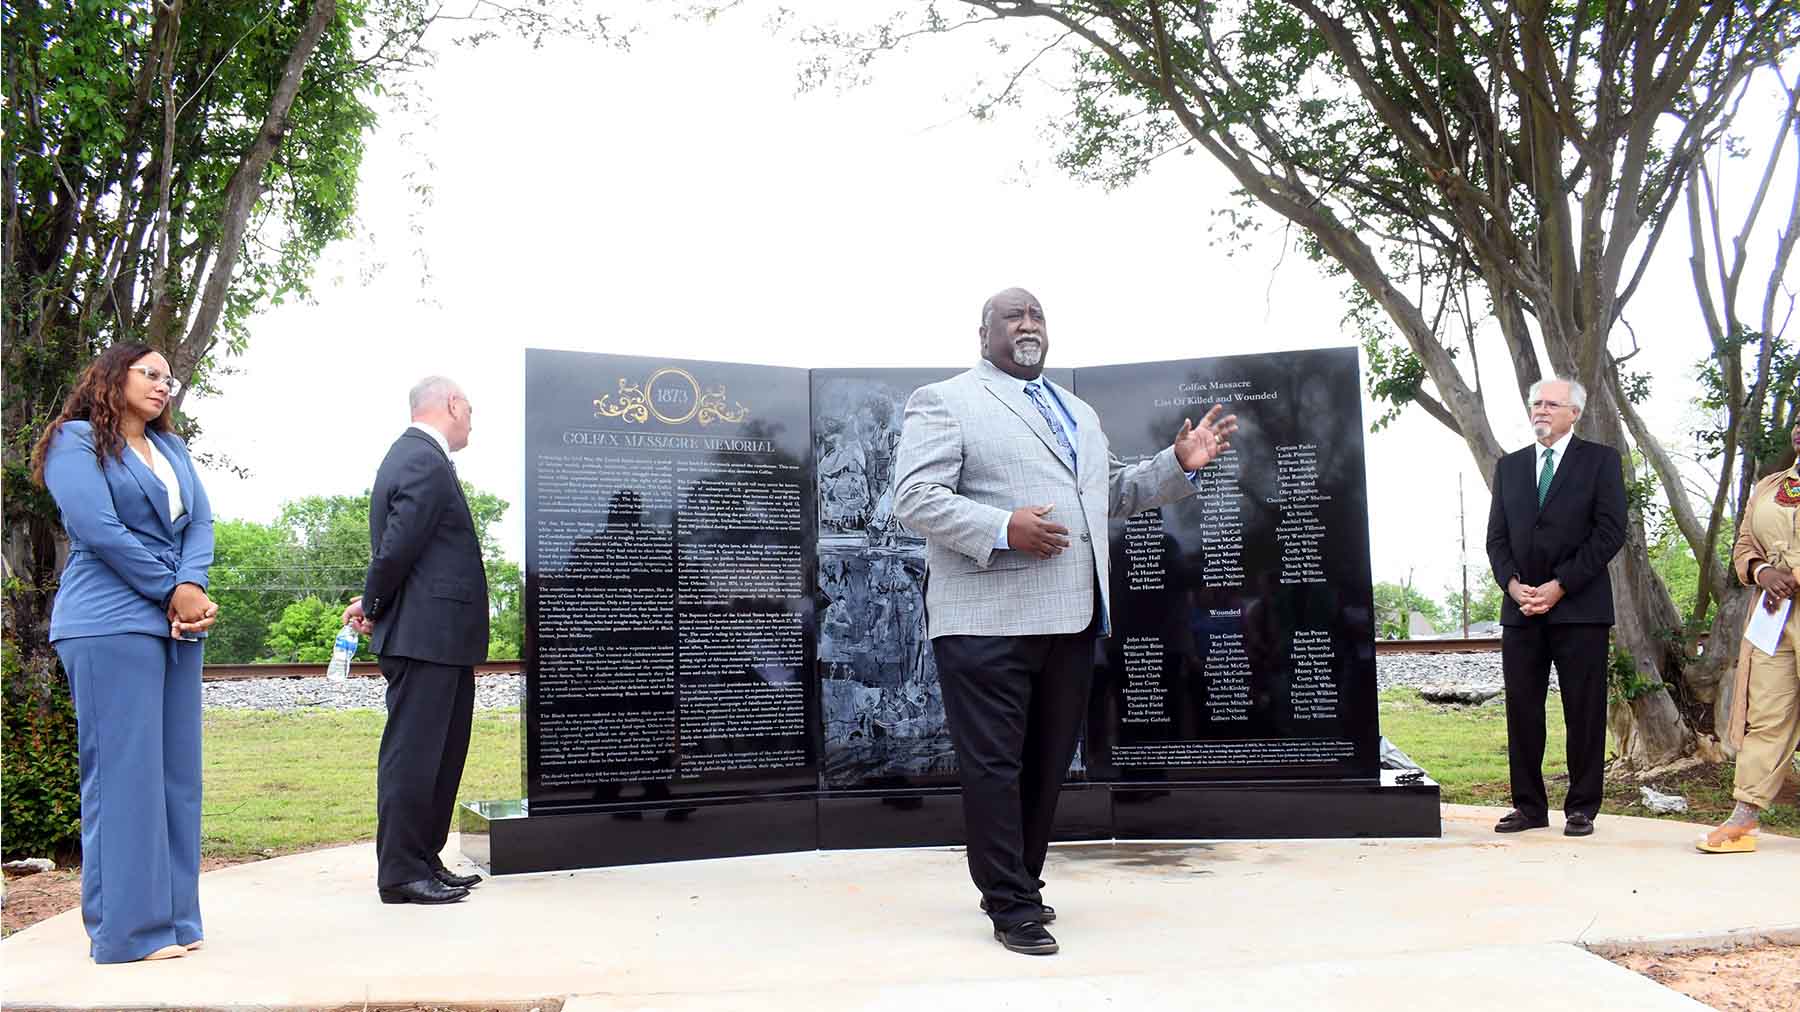 People in front of memorial made of three black granite slabs carved with the names of victims of Colfax, Louisiana, Massacre